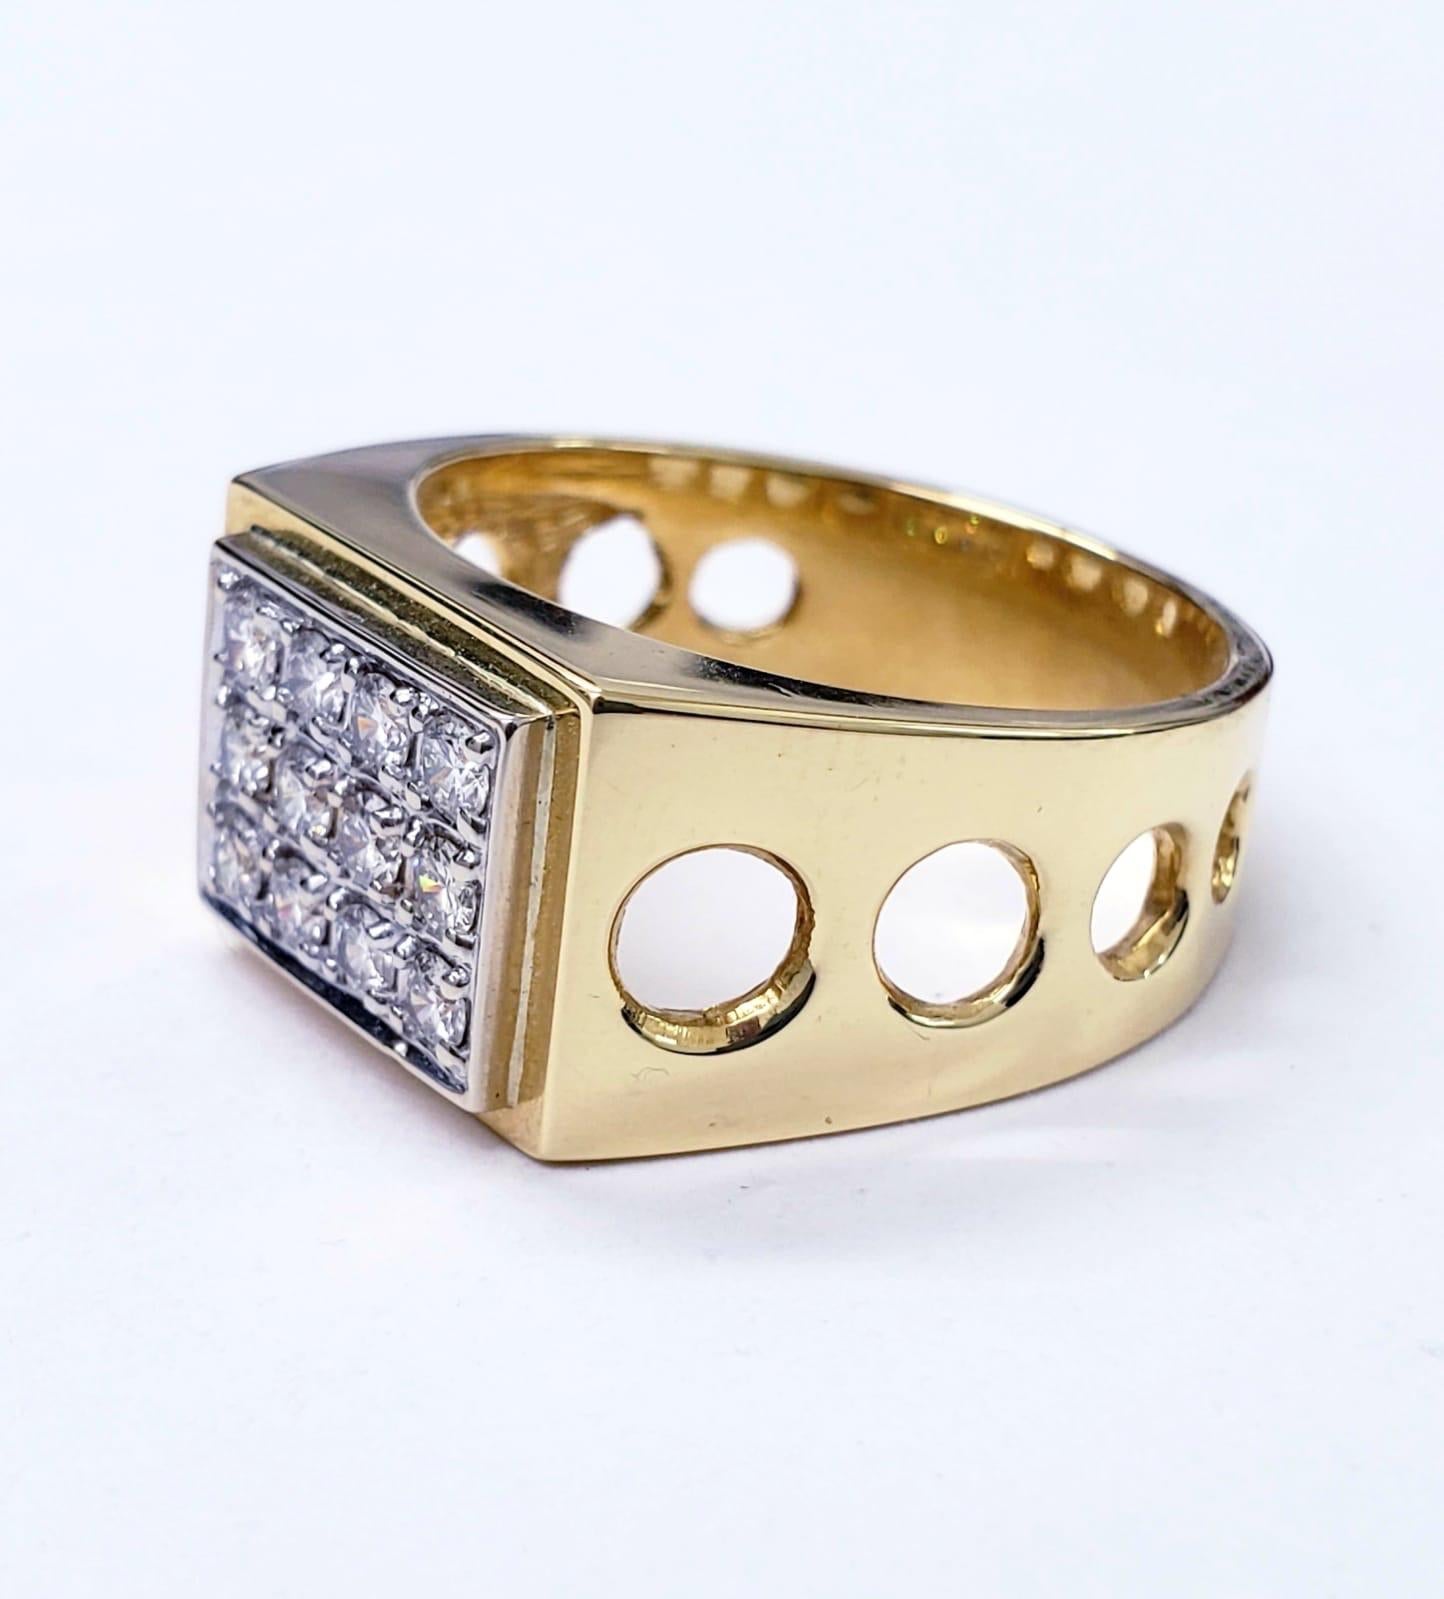 Vintage 1.50ct Diamond Square Design Statement 14k Gold Ring. The ring features 12 round cut high color high clarity diamonds approx total weight 1.50 carats. The ring is a size 12. The ring measures 17mm X 13mm. The ring weights 14.3 grams of 14k